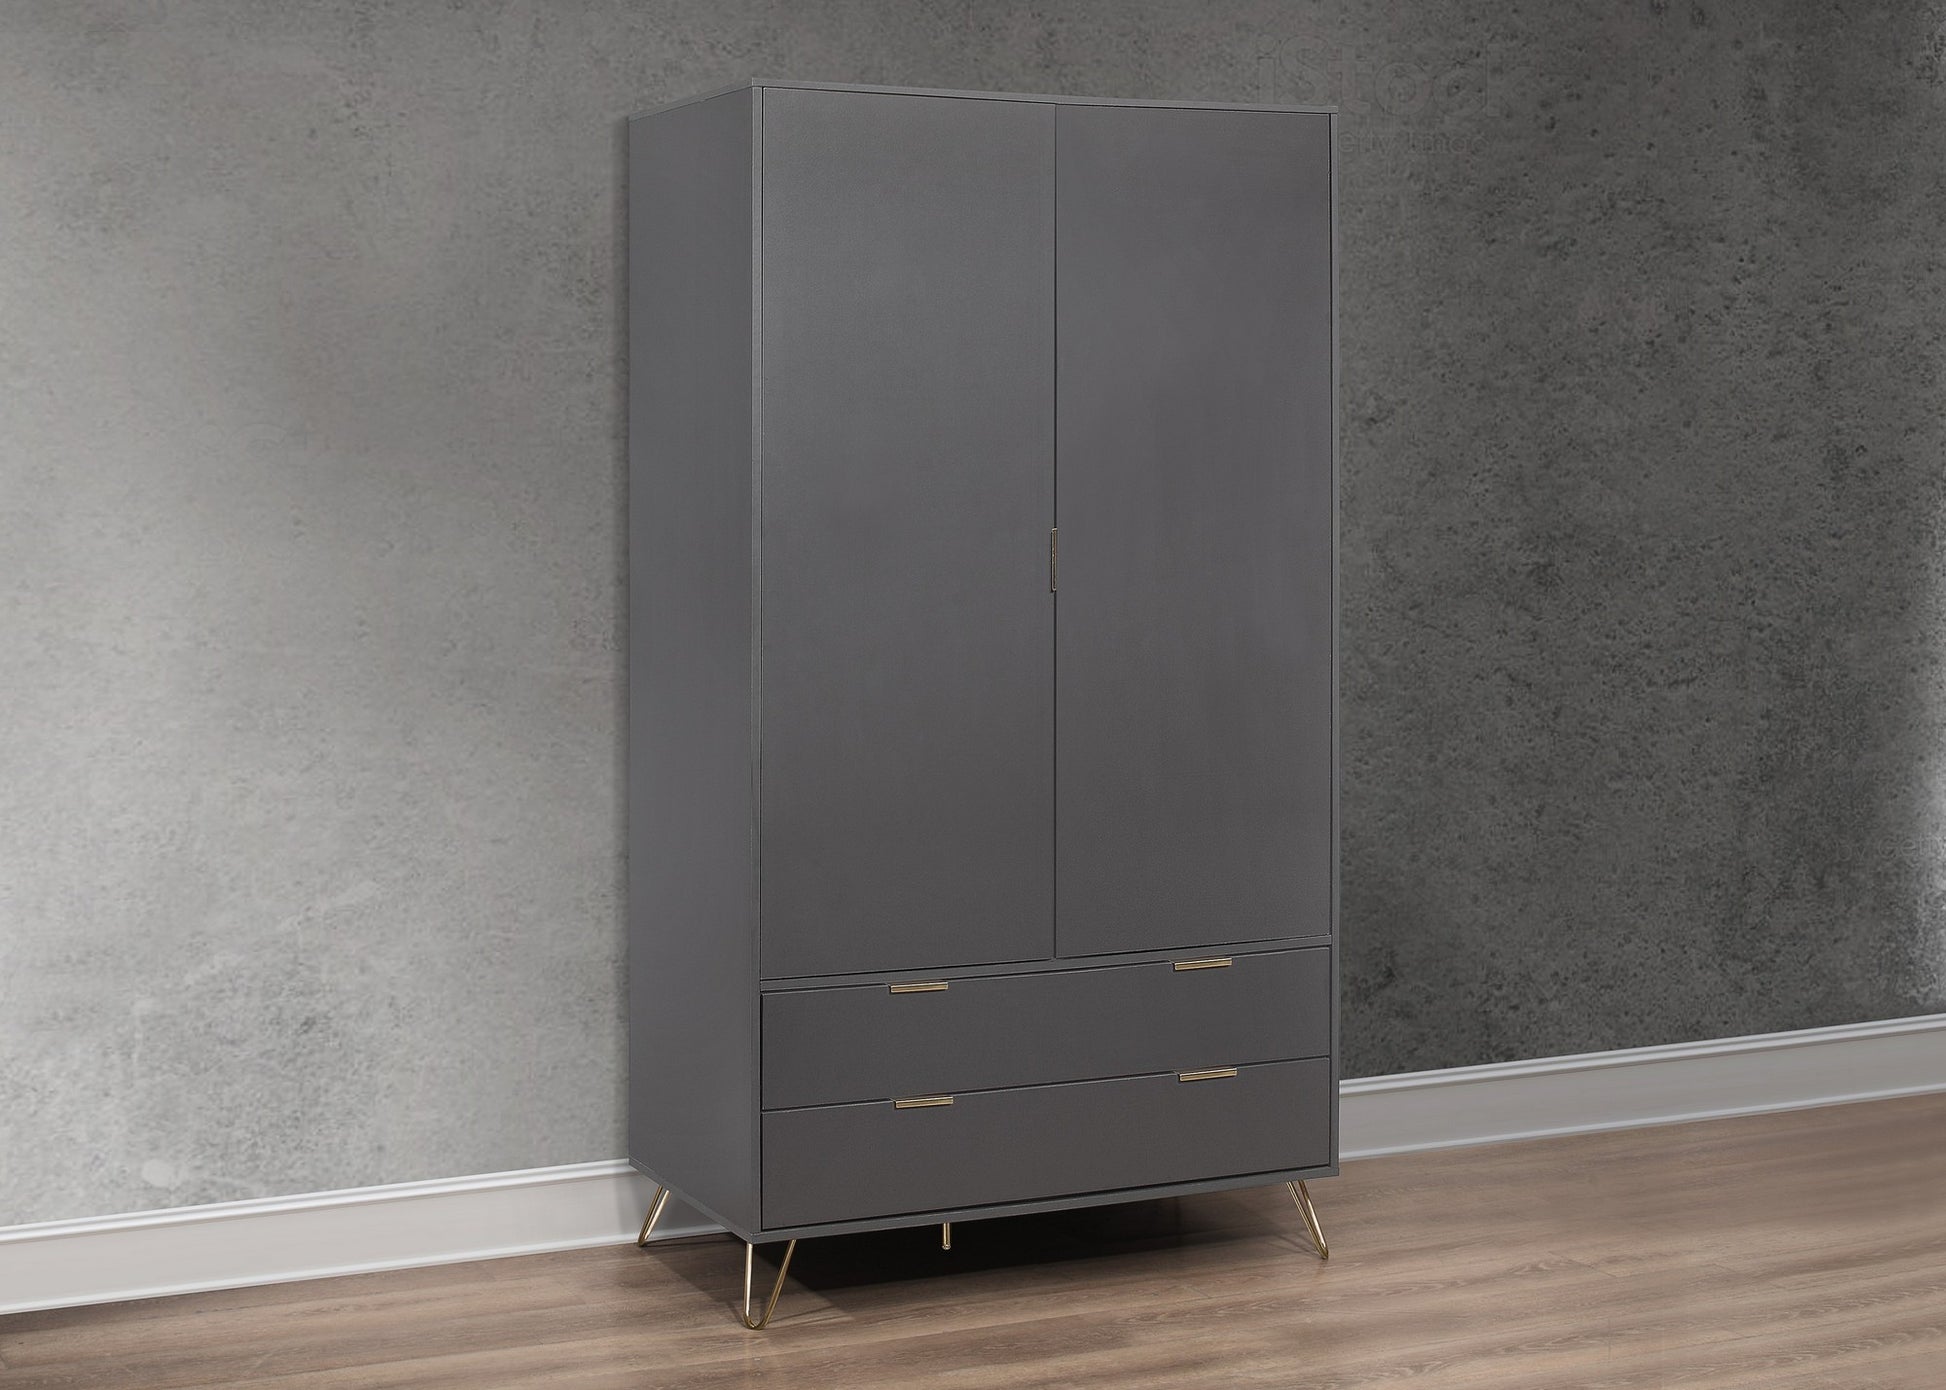 Arlo 2-Door Wardrobe with 2 Drawers, Gold Accent Handles, Hairpin Legs, Internal Shelves, Particle Board Construction